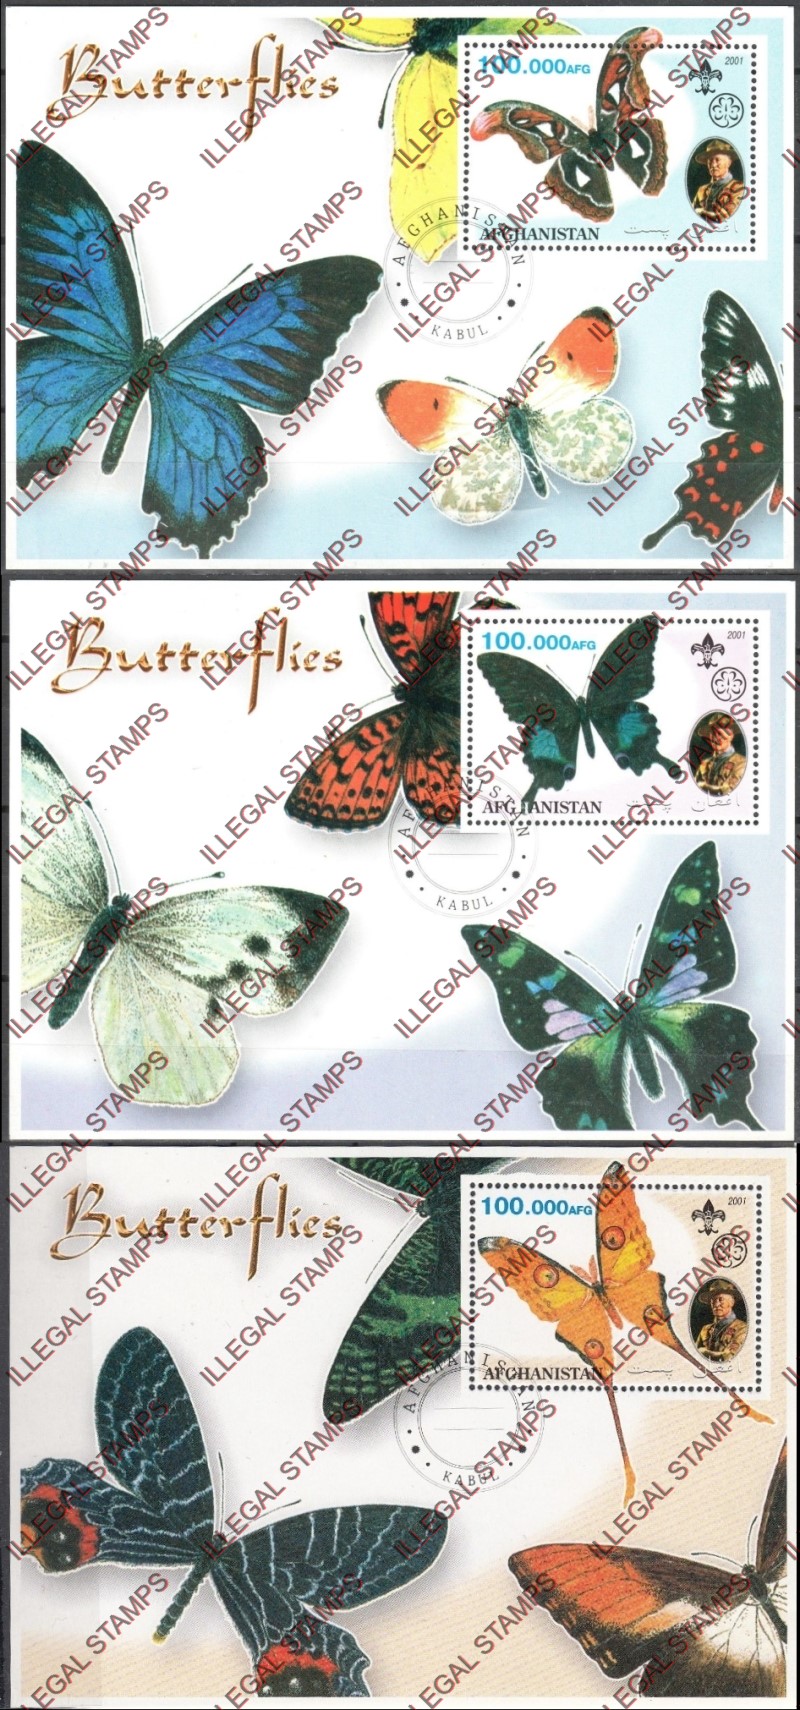 Afghanistan 2001 Butterflies Scouts Baden Powell Illegal Stamp Souvenir Sheets of One